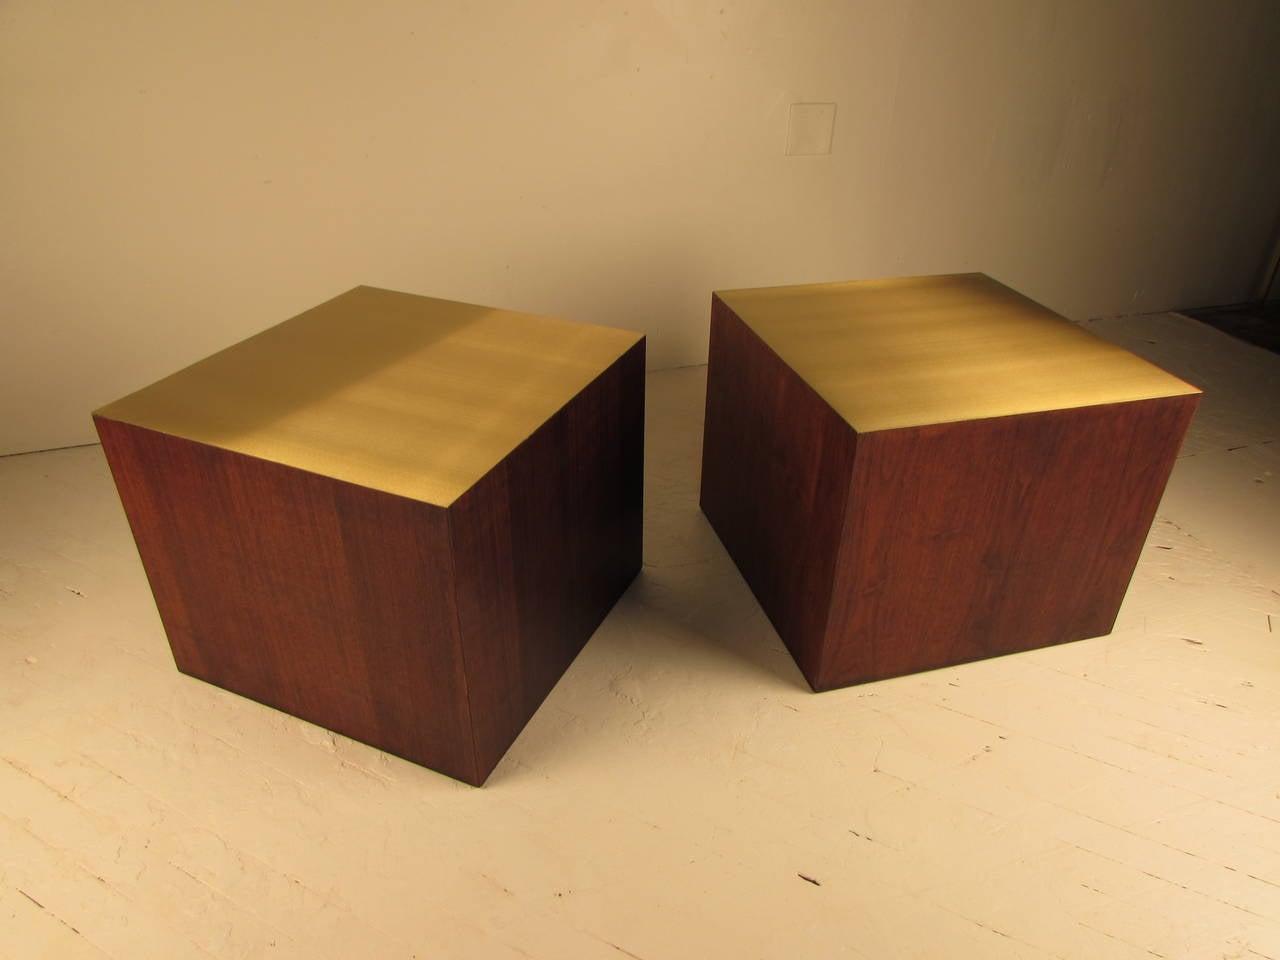 Handsome Harry Lunstead (Seattle) brass and walnut cube tables. New solid brass tops sit on beautifully grained walnut bases. A clean, sleek design utilizing simple, gorgeous materials, always in style! Would also work well pushed together as a